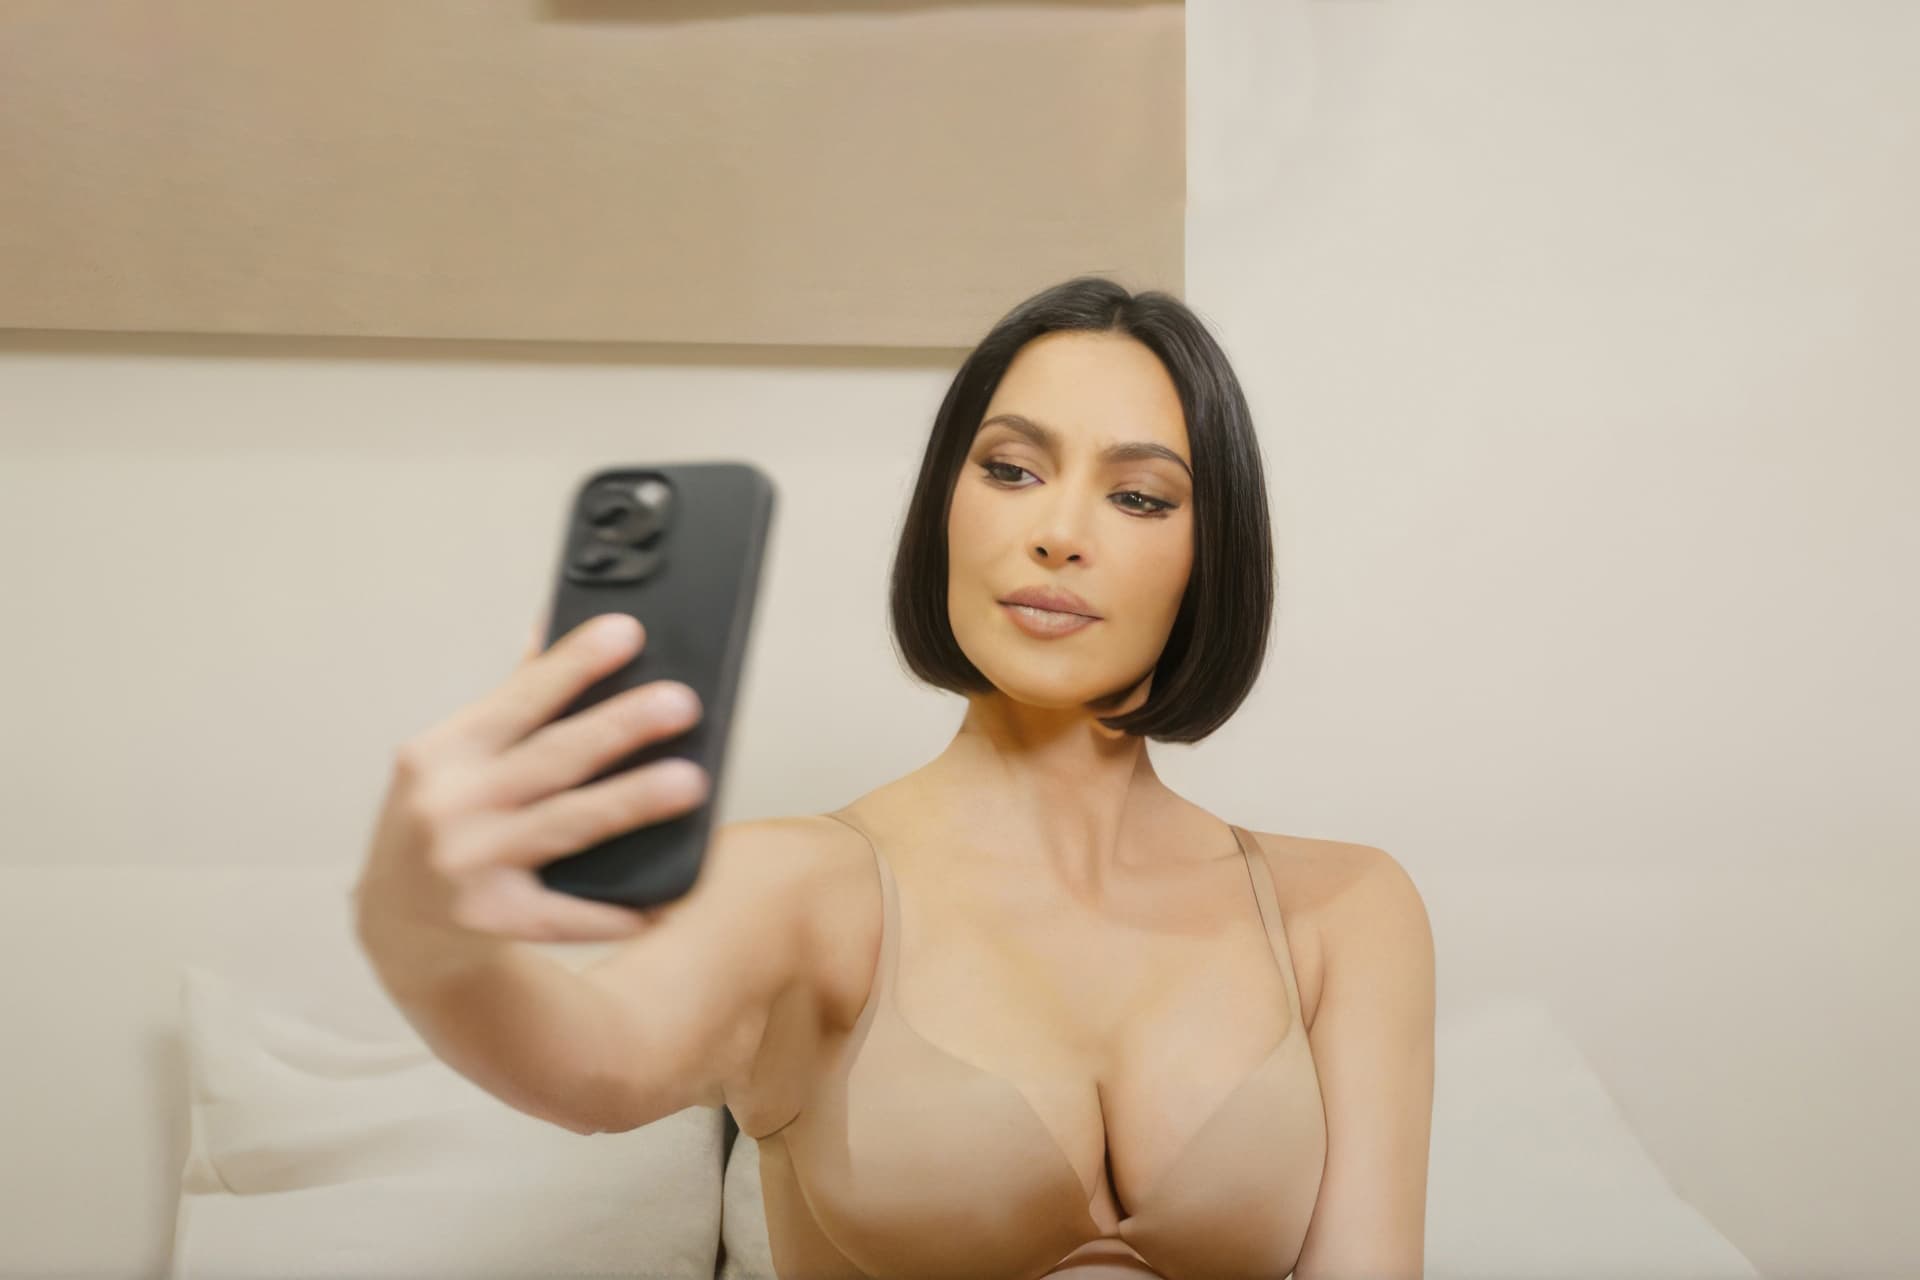 I'm a 32C and bought a Skims bra - it gives really good cleavage, Kim  Kardashian can take all my money